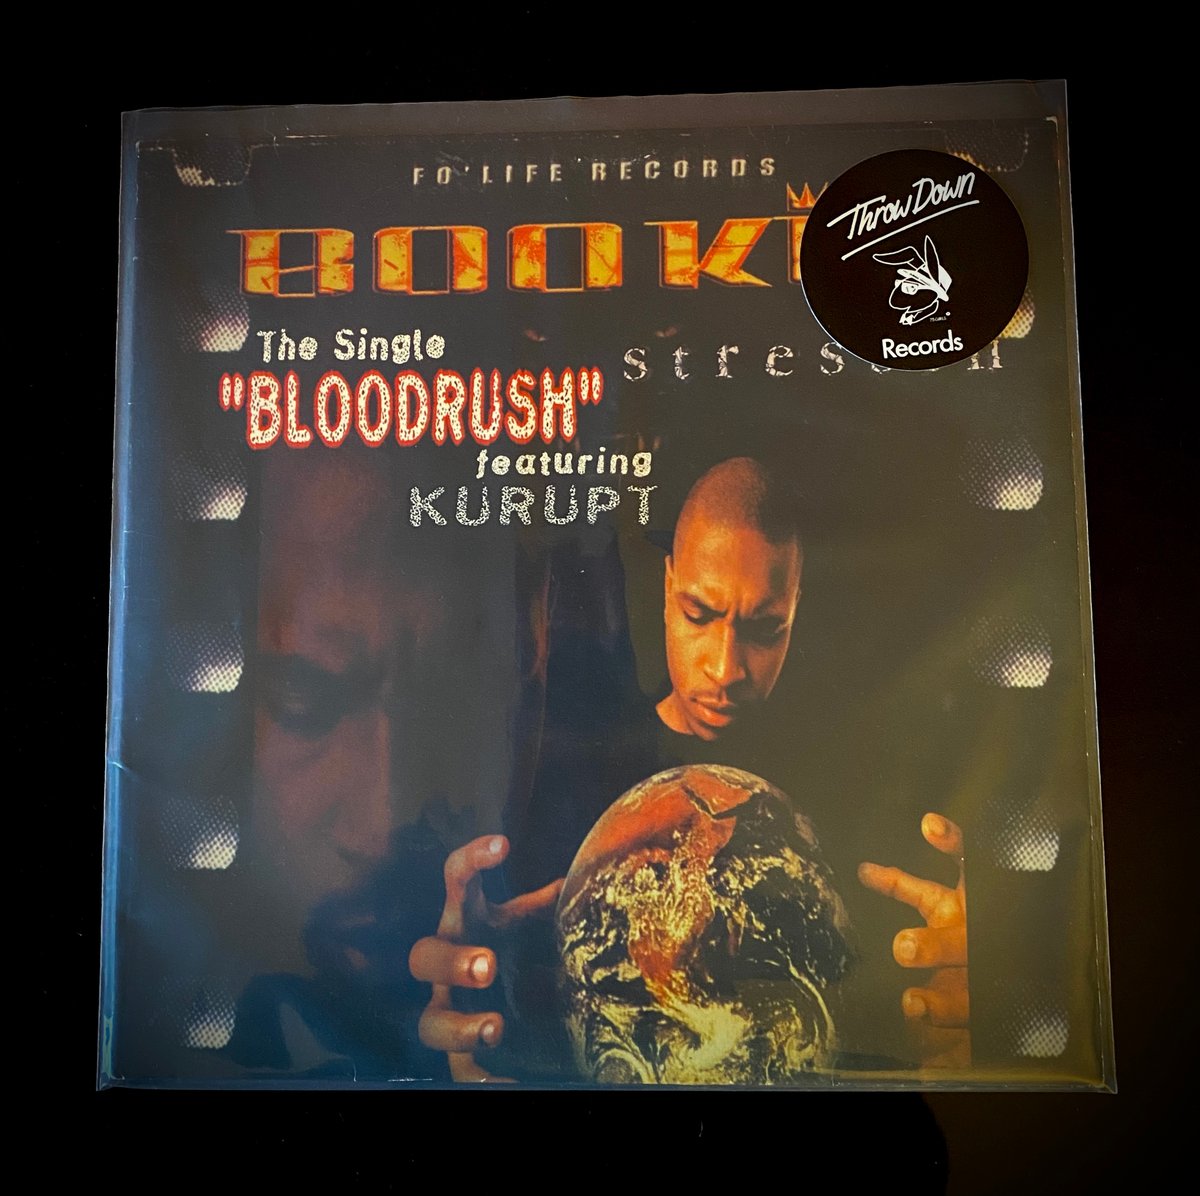 Image of Bookie “BLOOD RUSH” 12” 